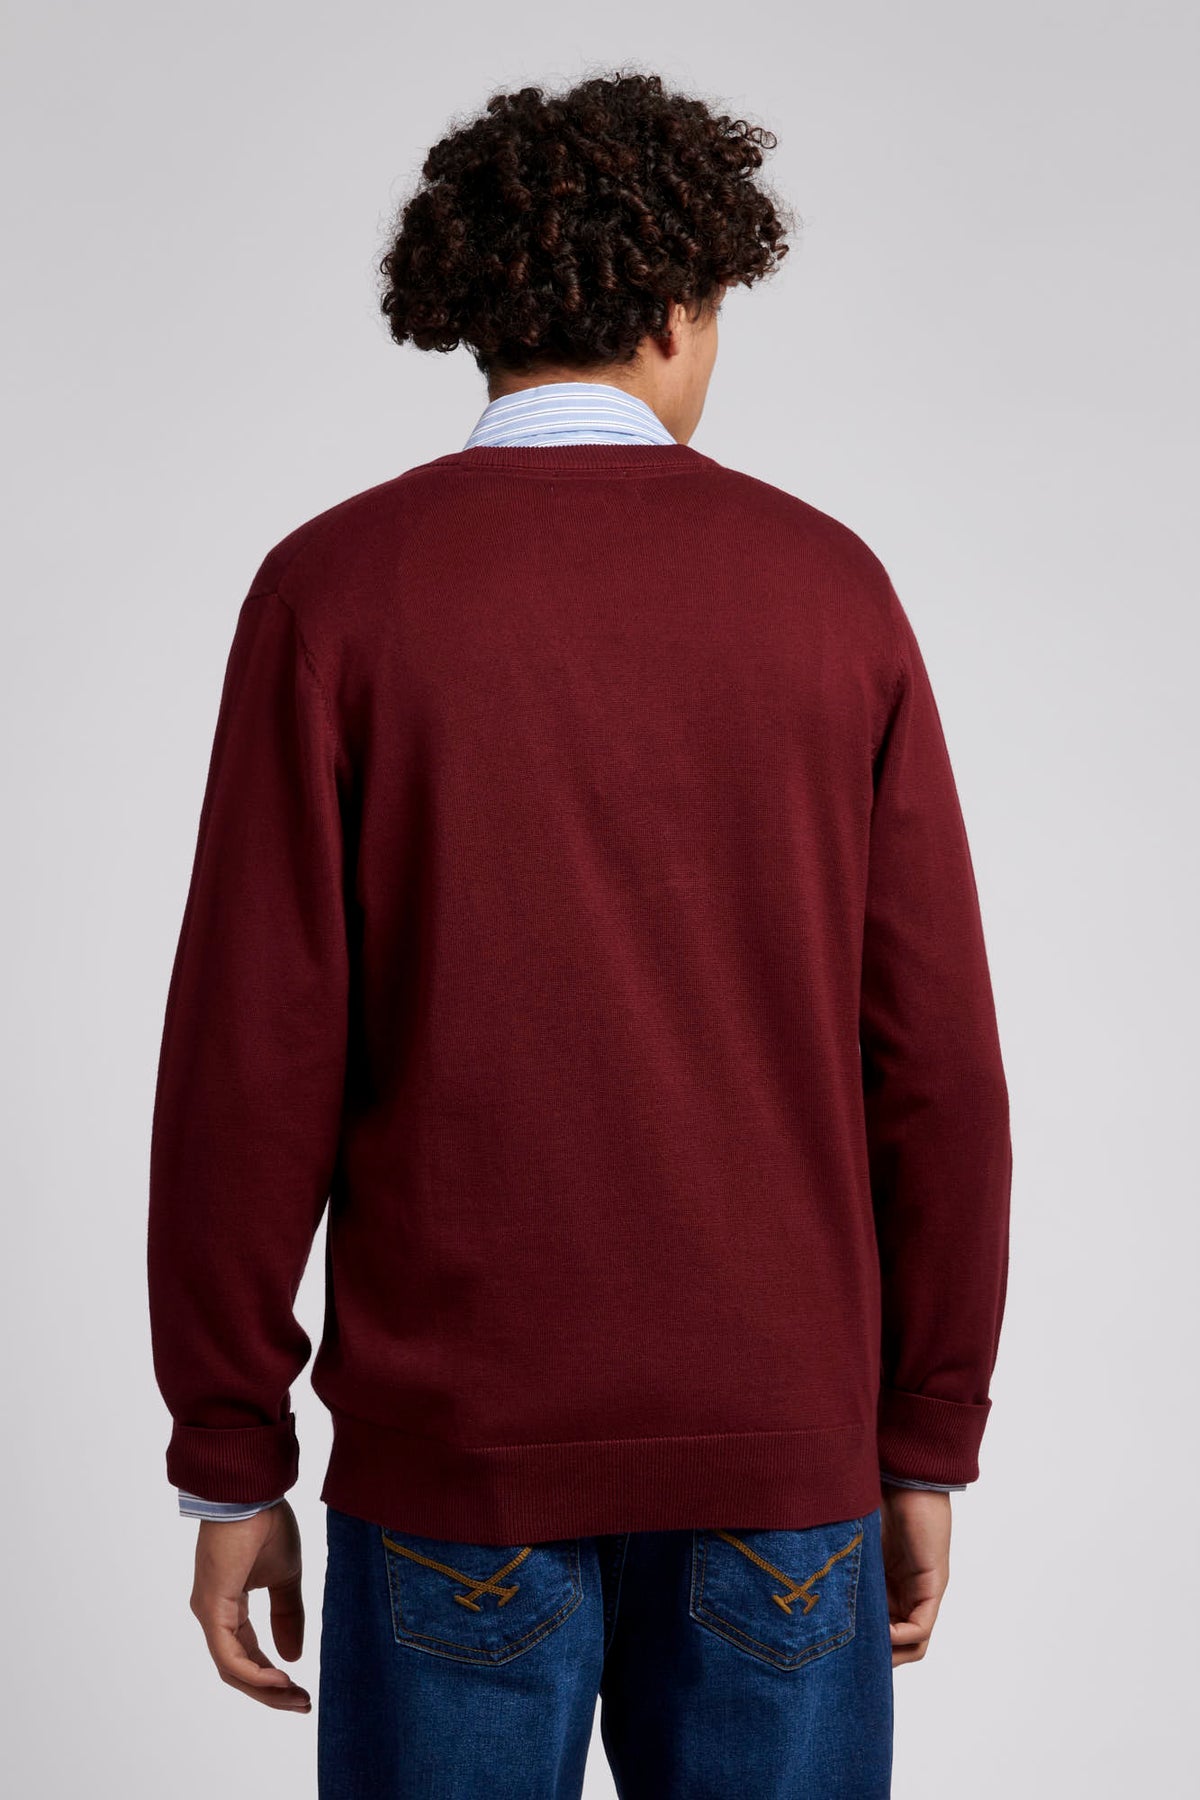 Mens Knitted Cardigan in Windsor Wine